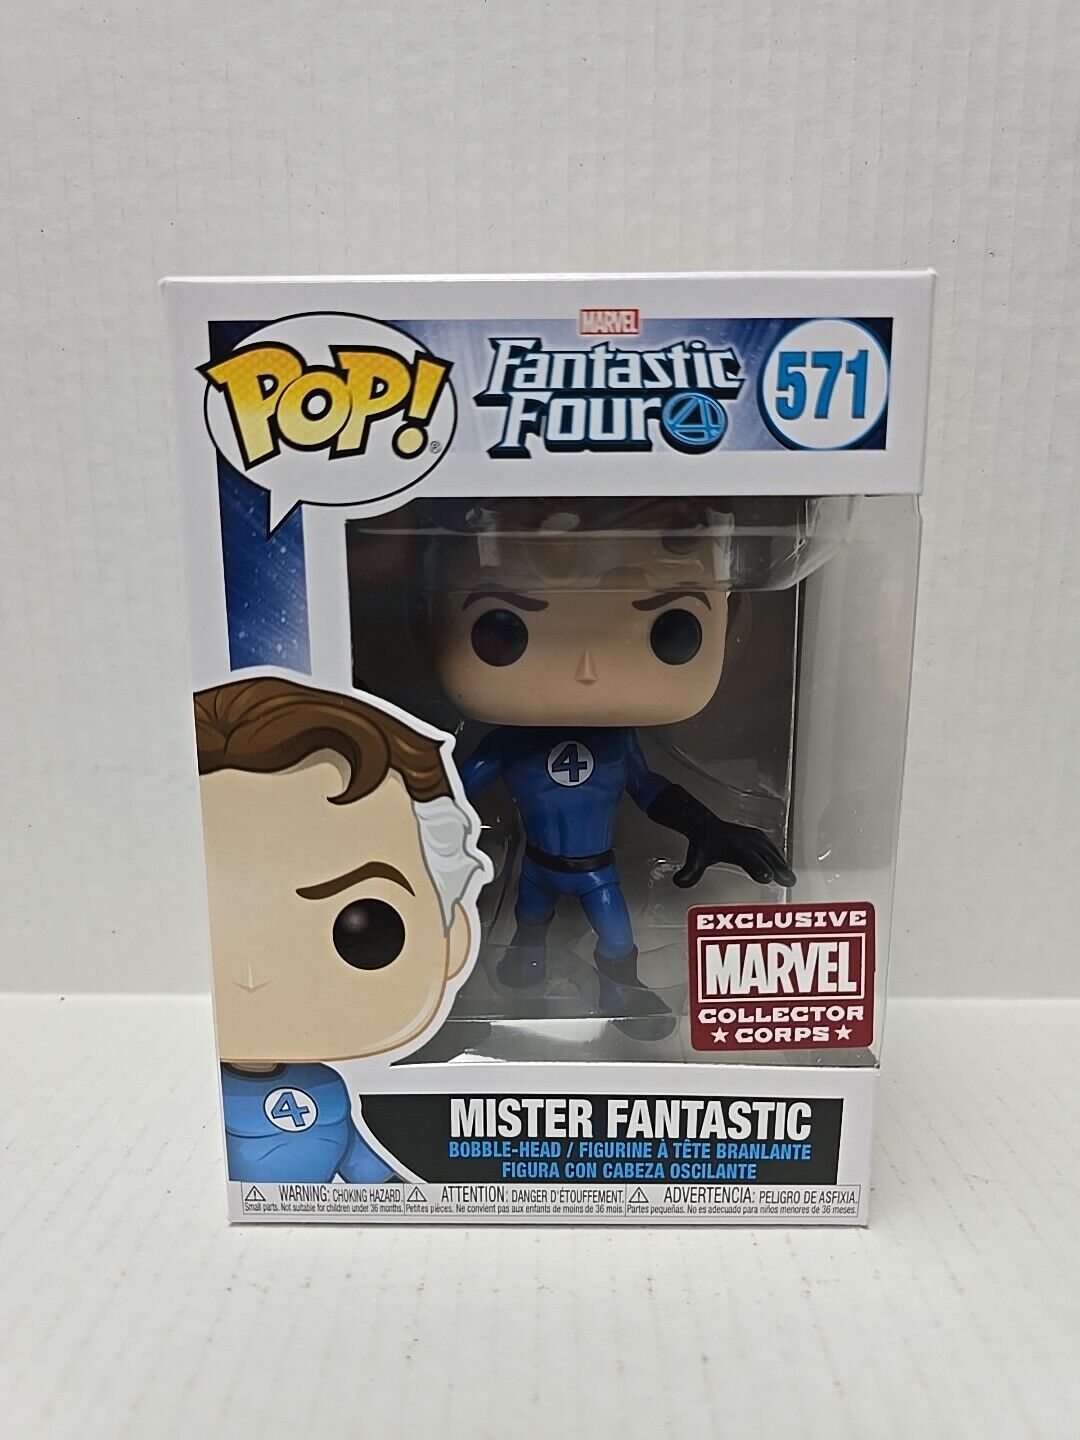 Funko POP Fantastic Four Mister Fantastic 571 Marvel Collector Corps­ Exclusive